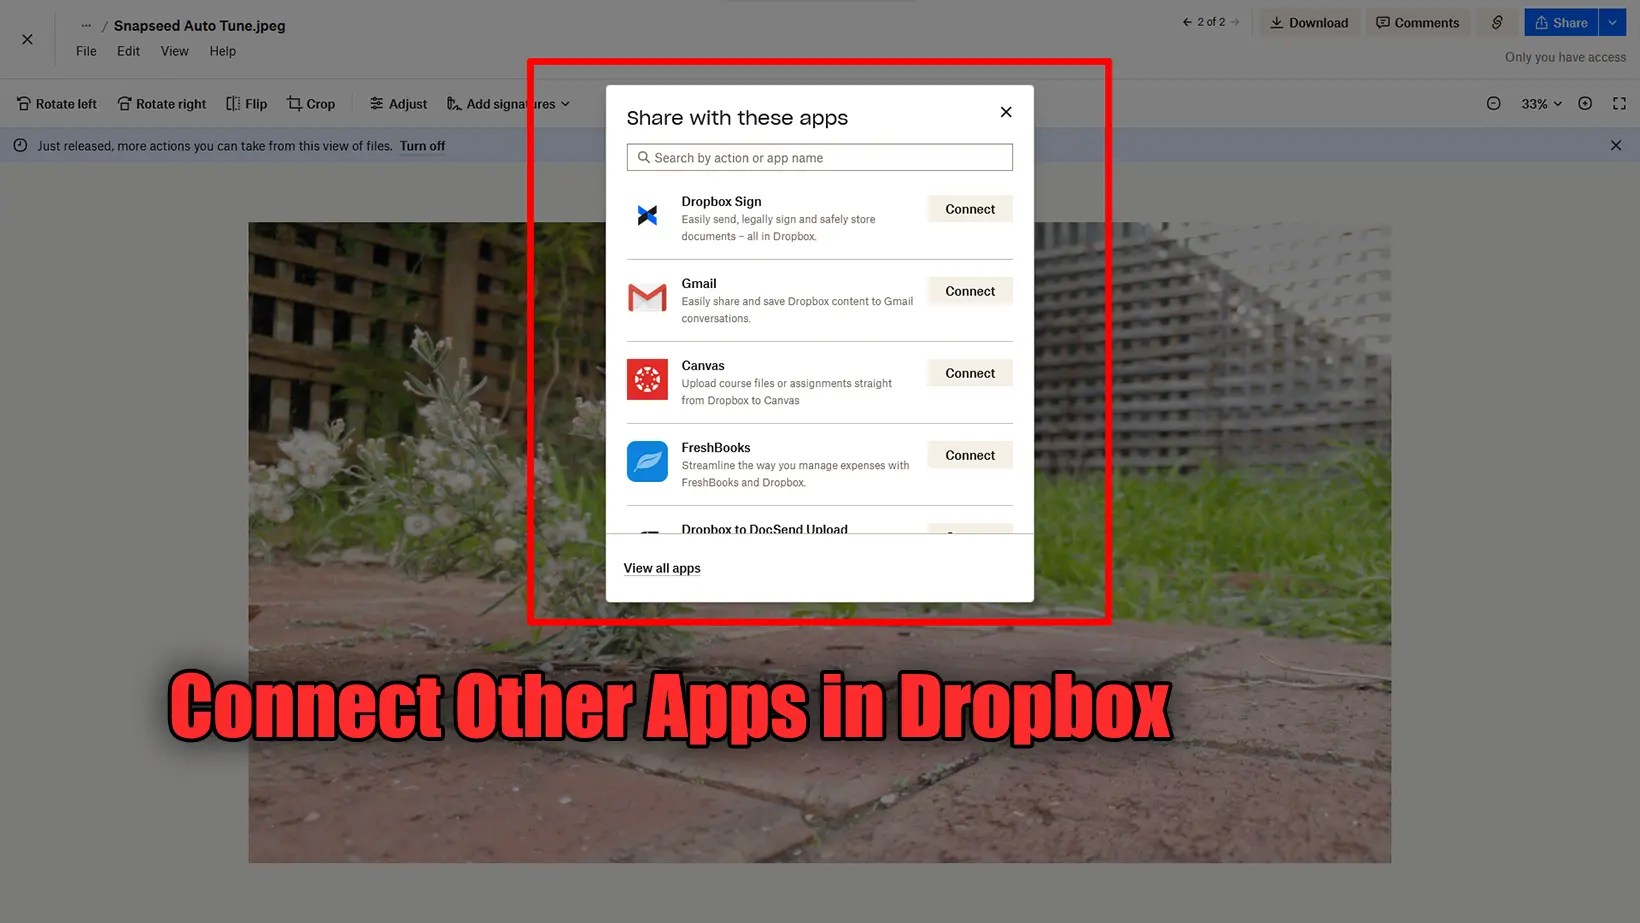 Connect Other Apps in Dropbox